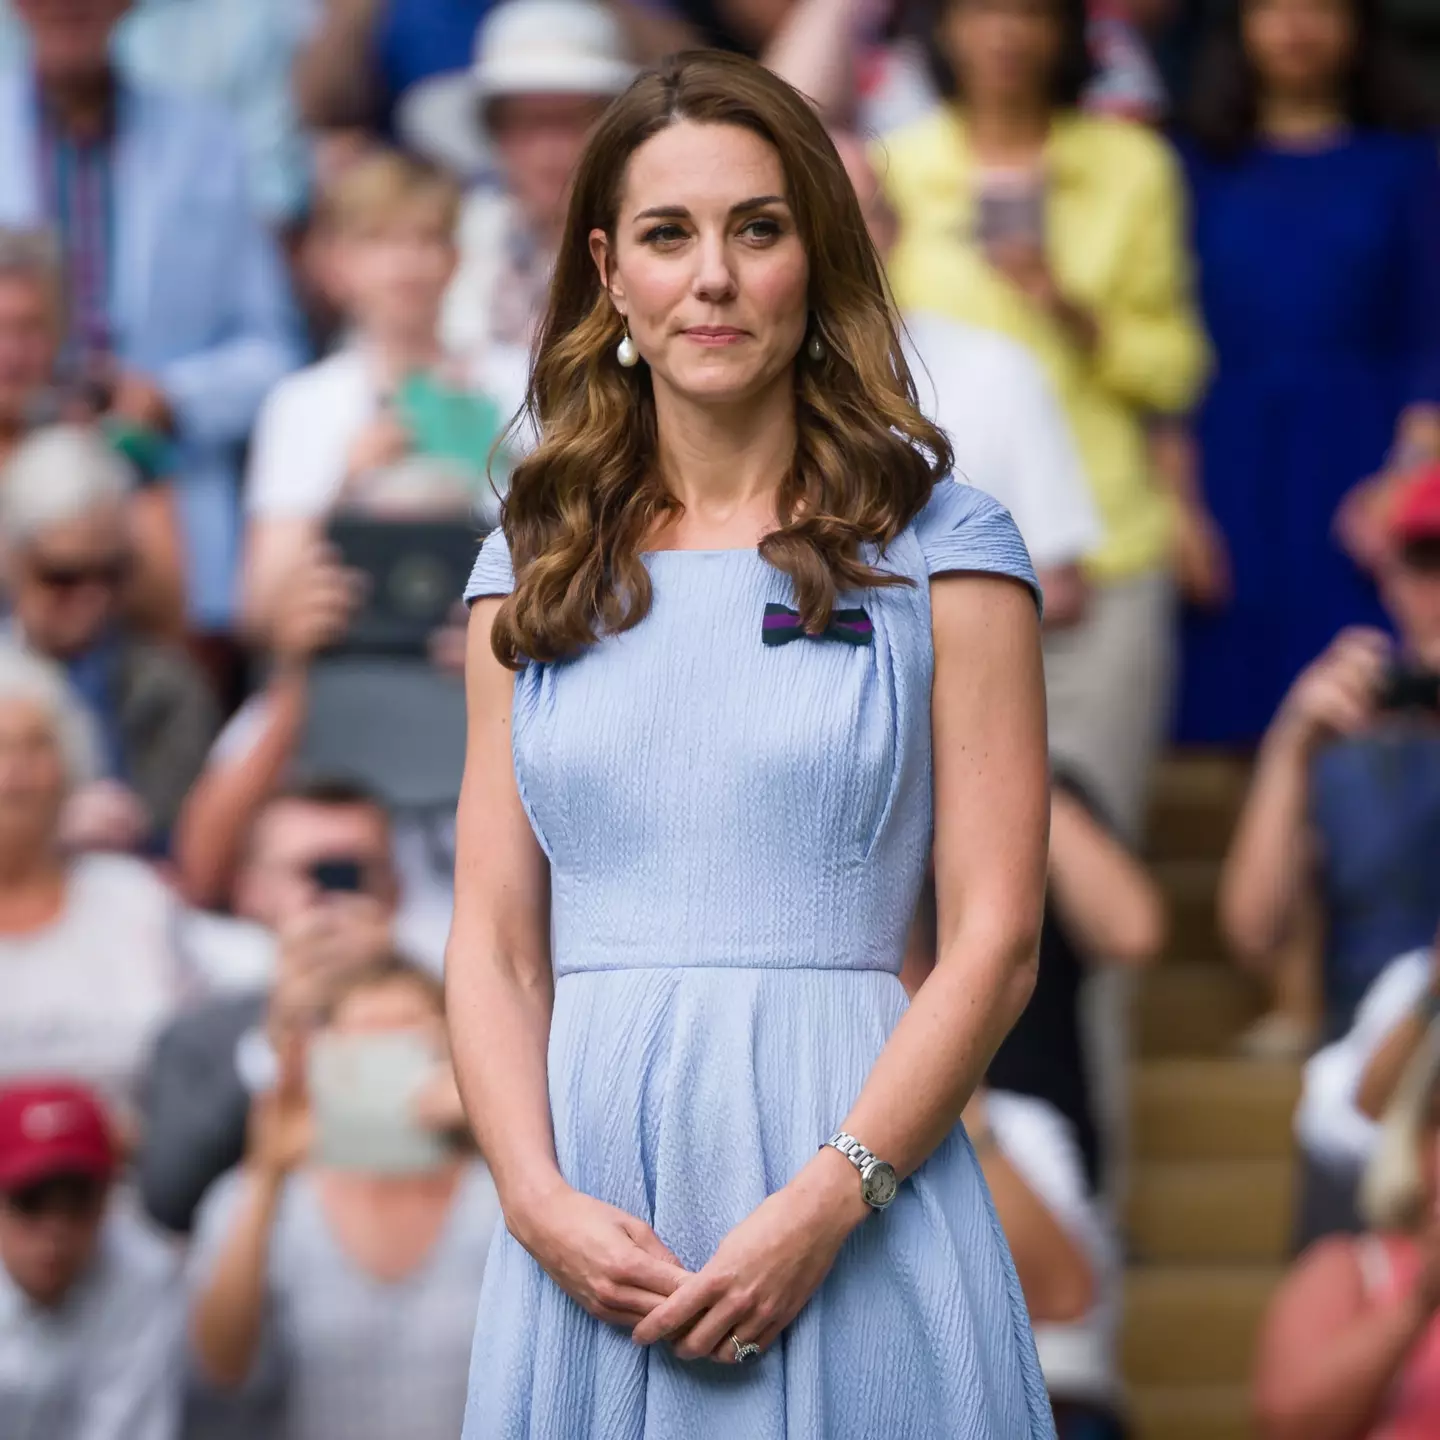 Kate Middleton addressed her health in an emotional statement.